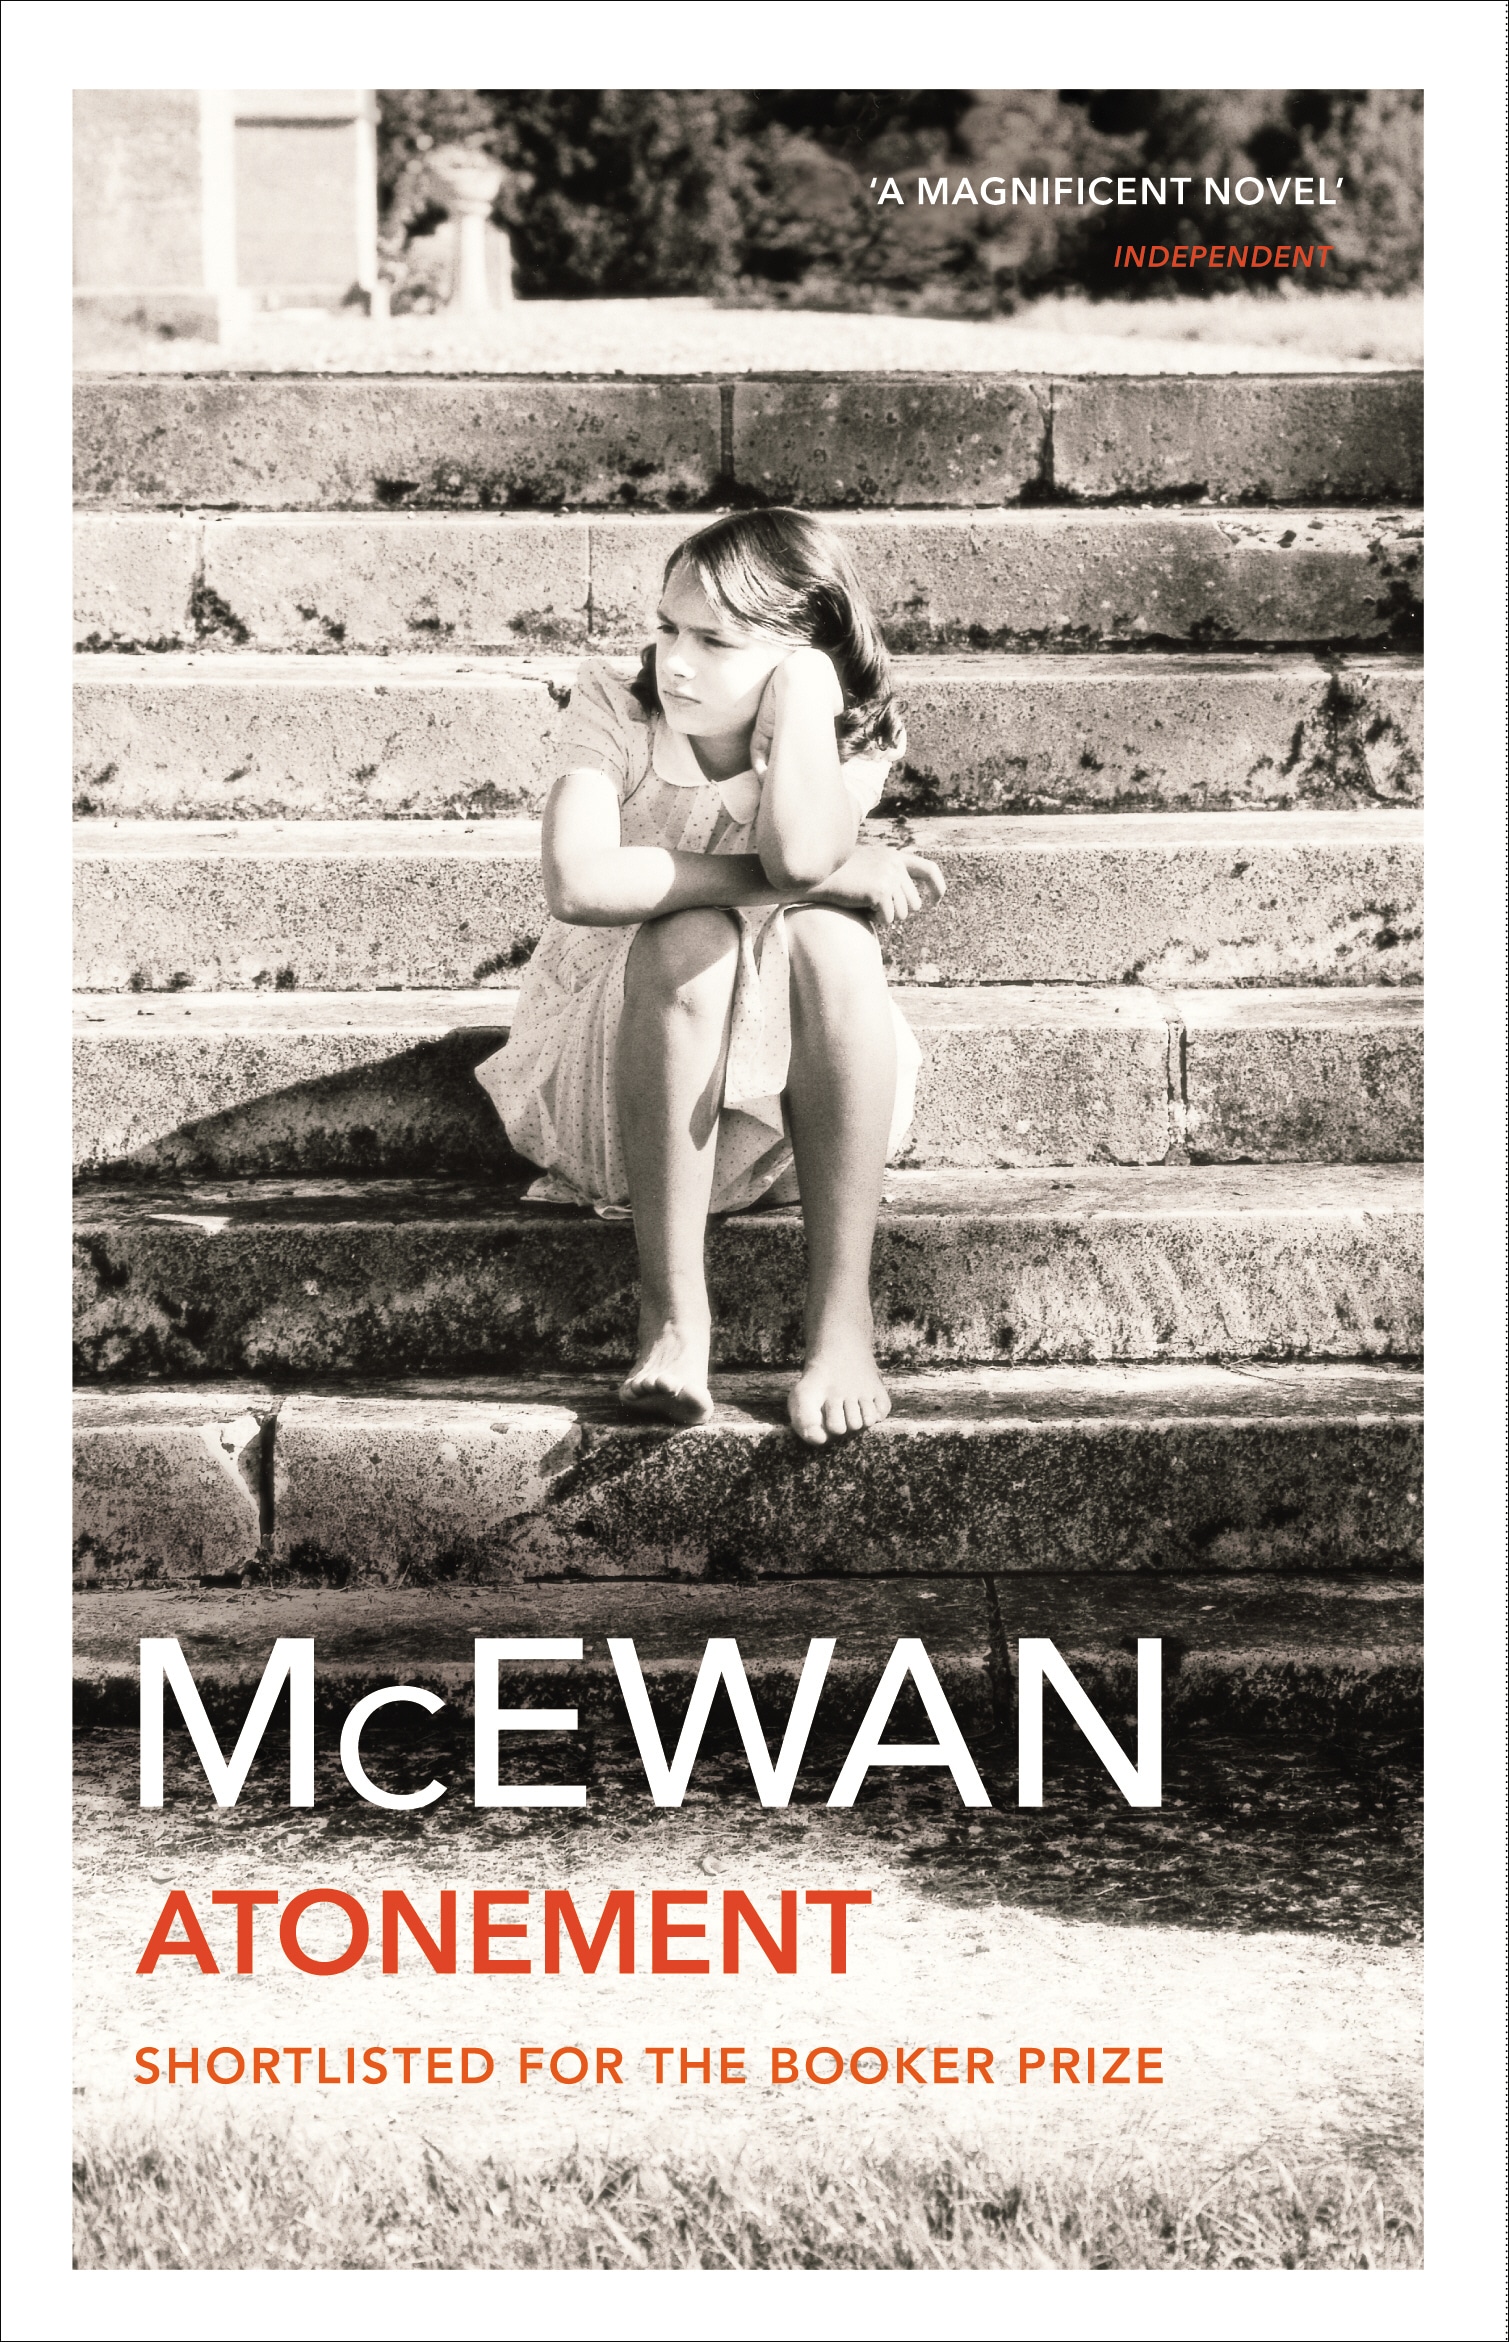 Book “Atonement” by Ian McEwan — May 2, 2002